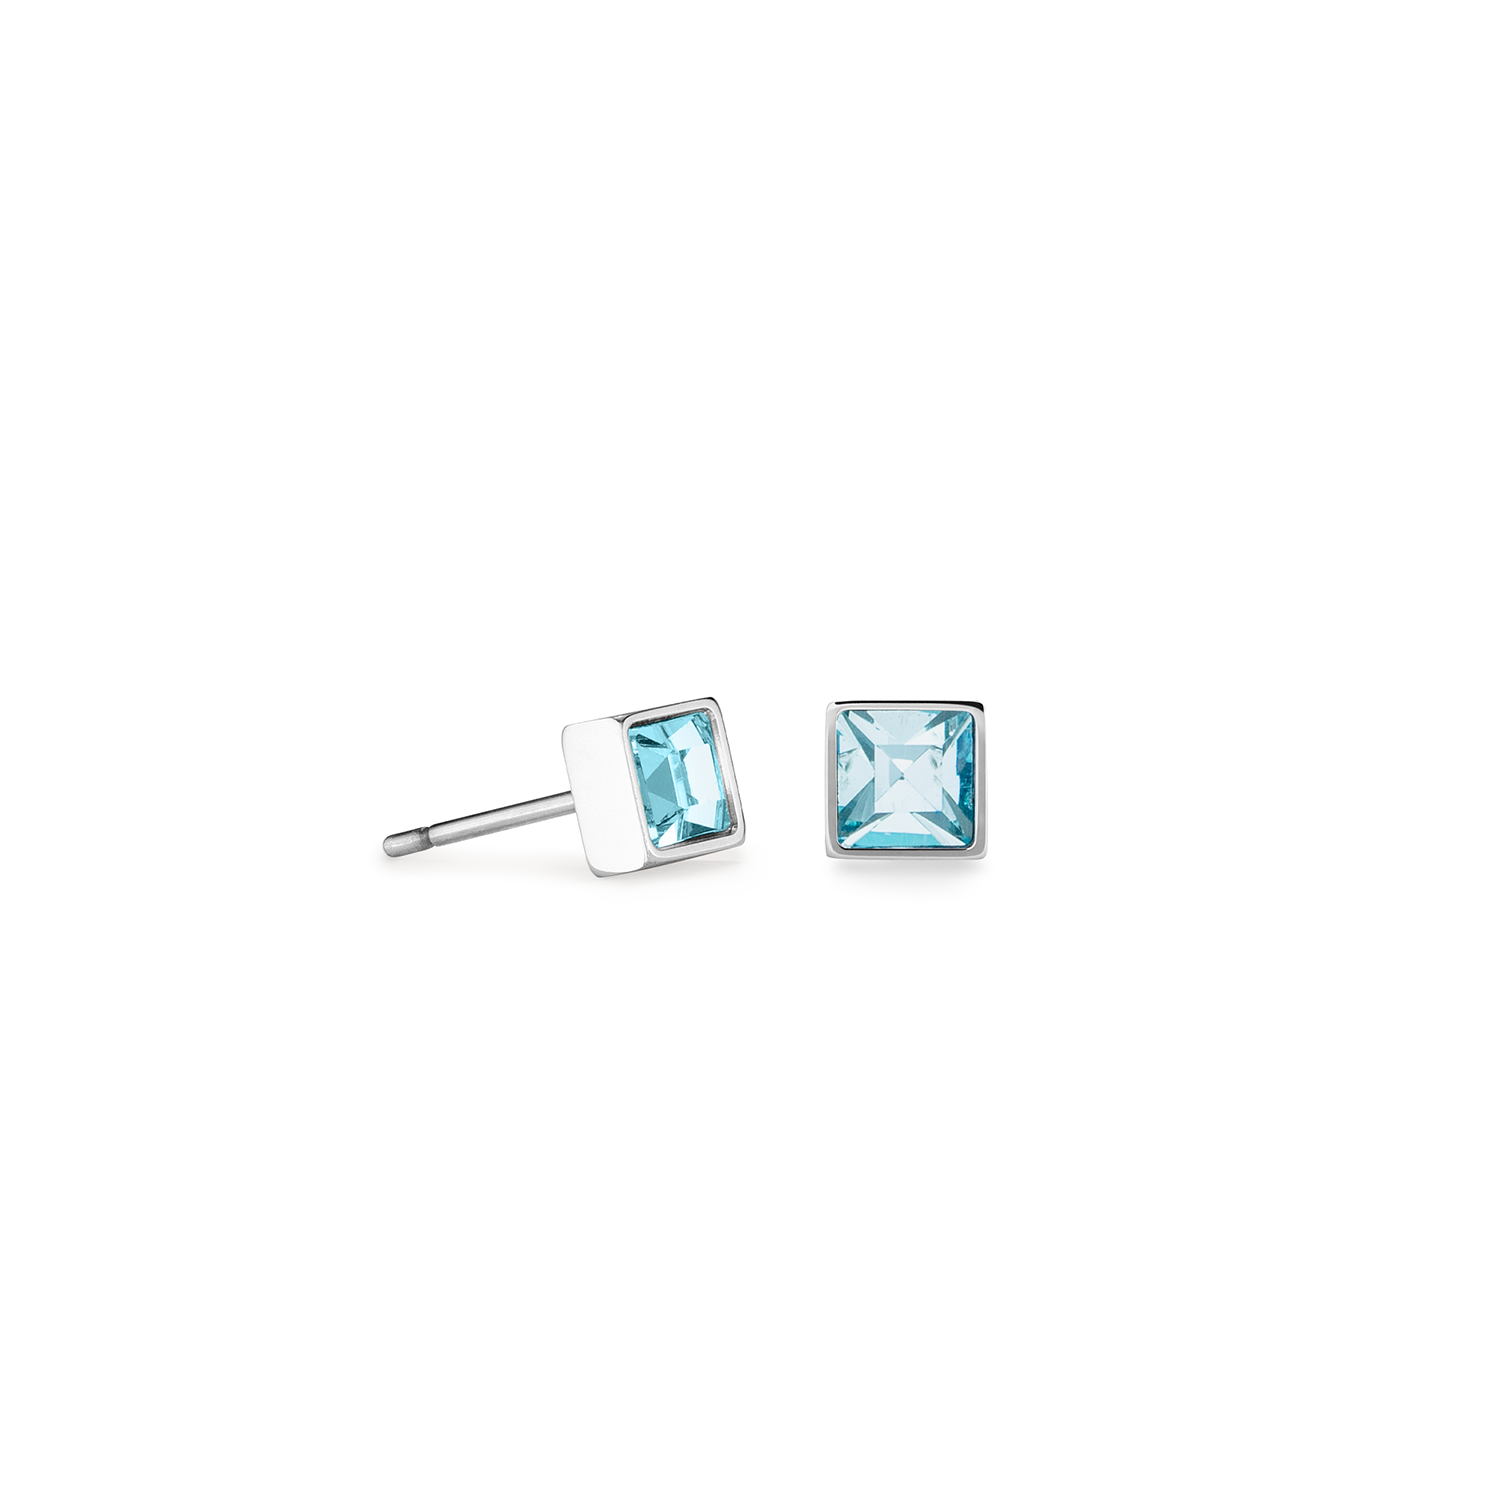 Brilliant Square Small Stud Earrings with Crystals 0501/21_2017 - Sky Blue